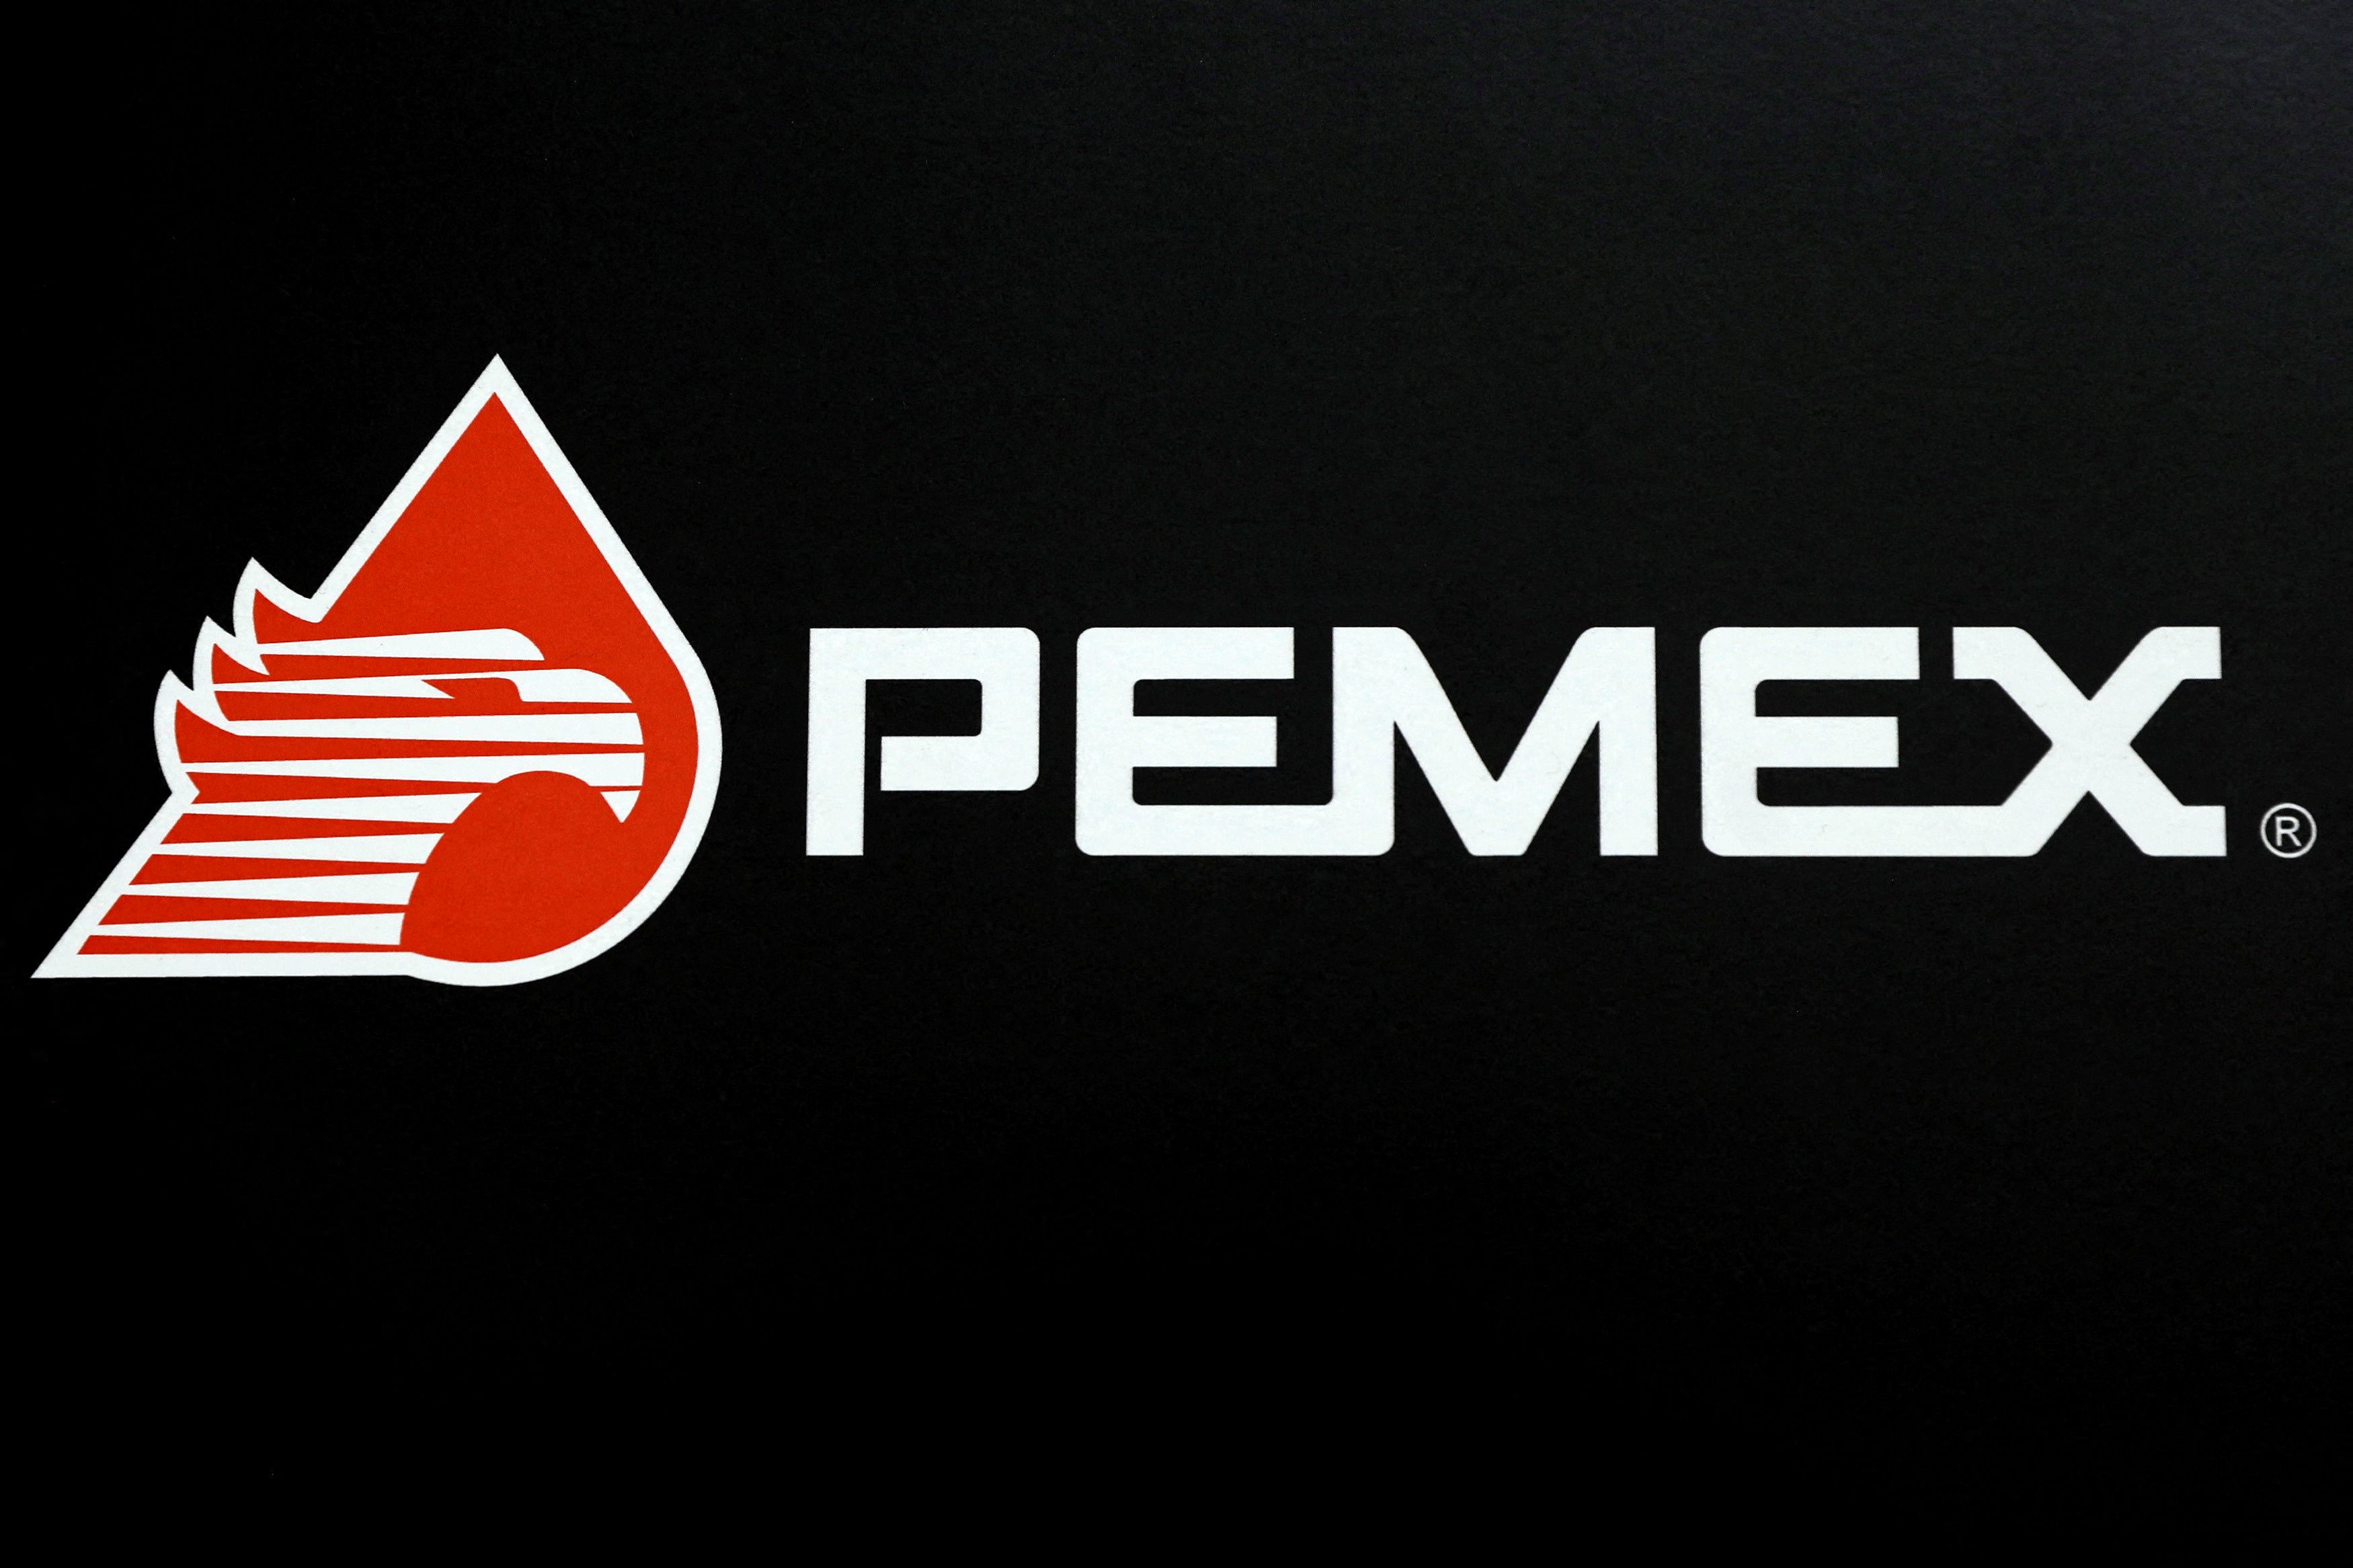 Pemex logo is pictured during the launch of a new franchise and commercial strategy by Pemex, in Mexico City, Mexico, November 15, 2017. REUTERS/Edgard Garrido/File Photo